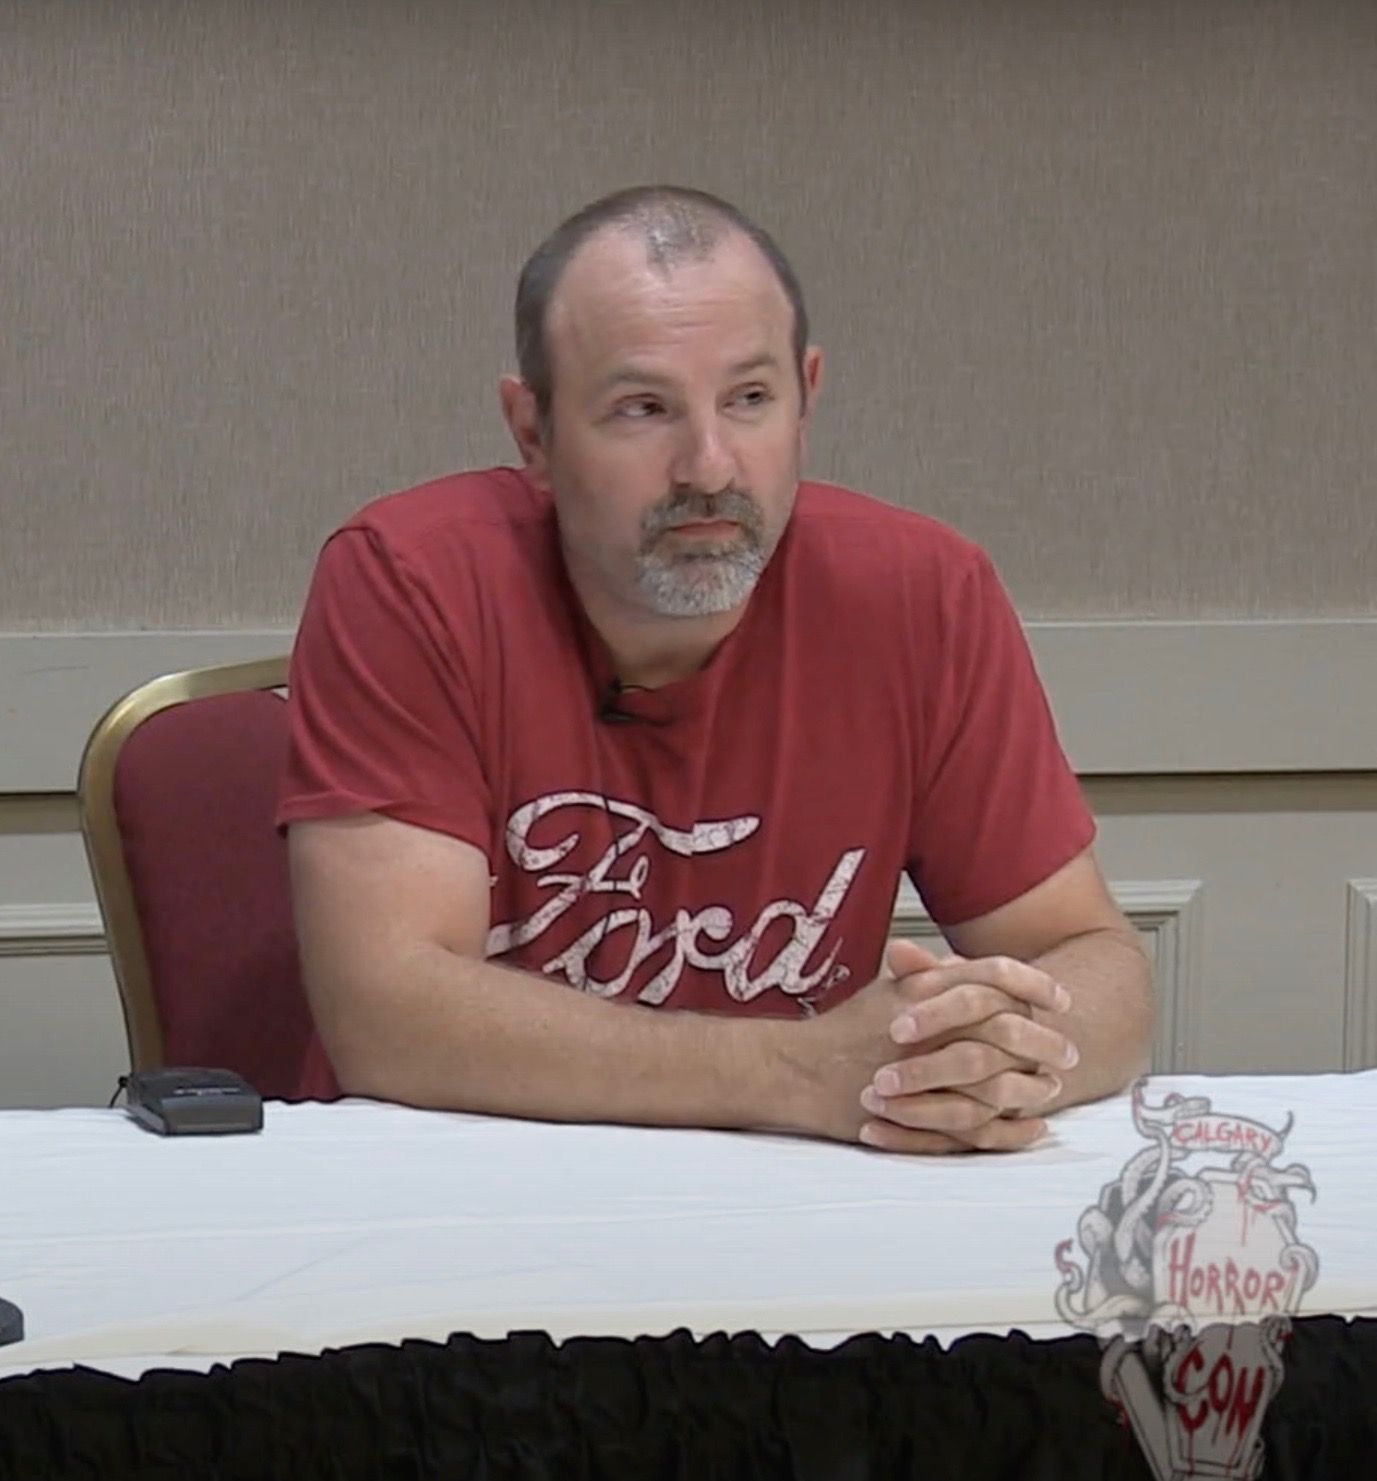 Danny Lloyd wearing a red Ford shirt with his hands on a white table and speaking at a conference.